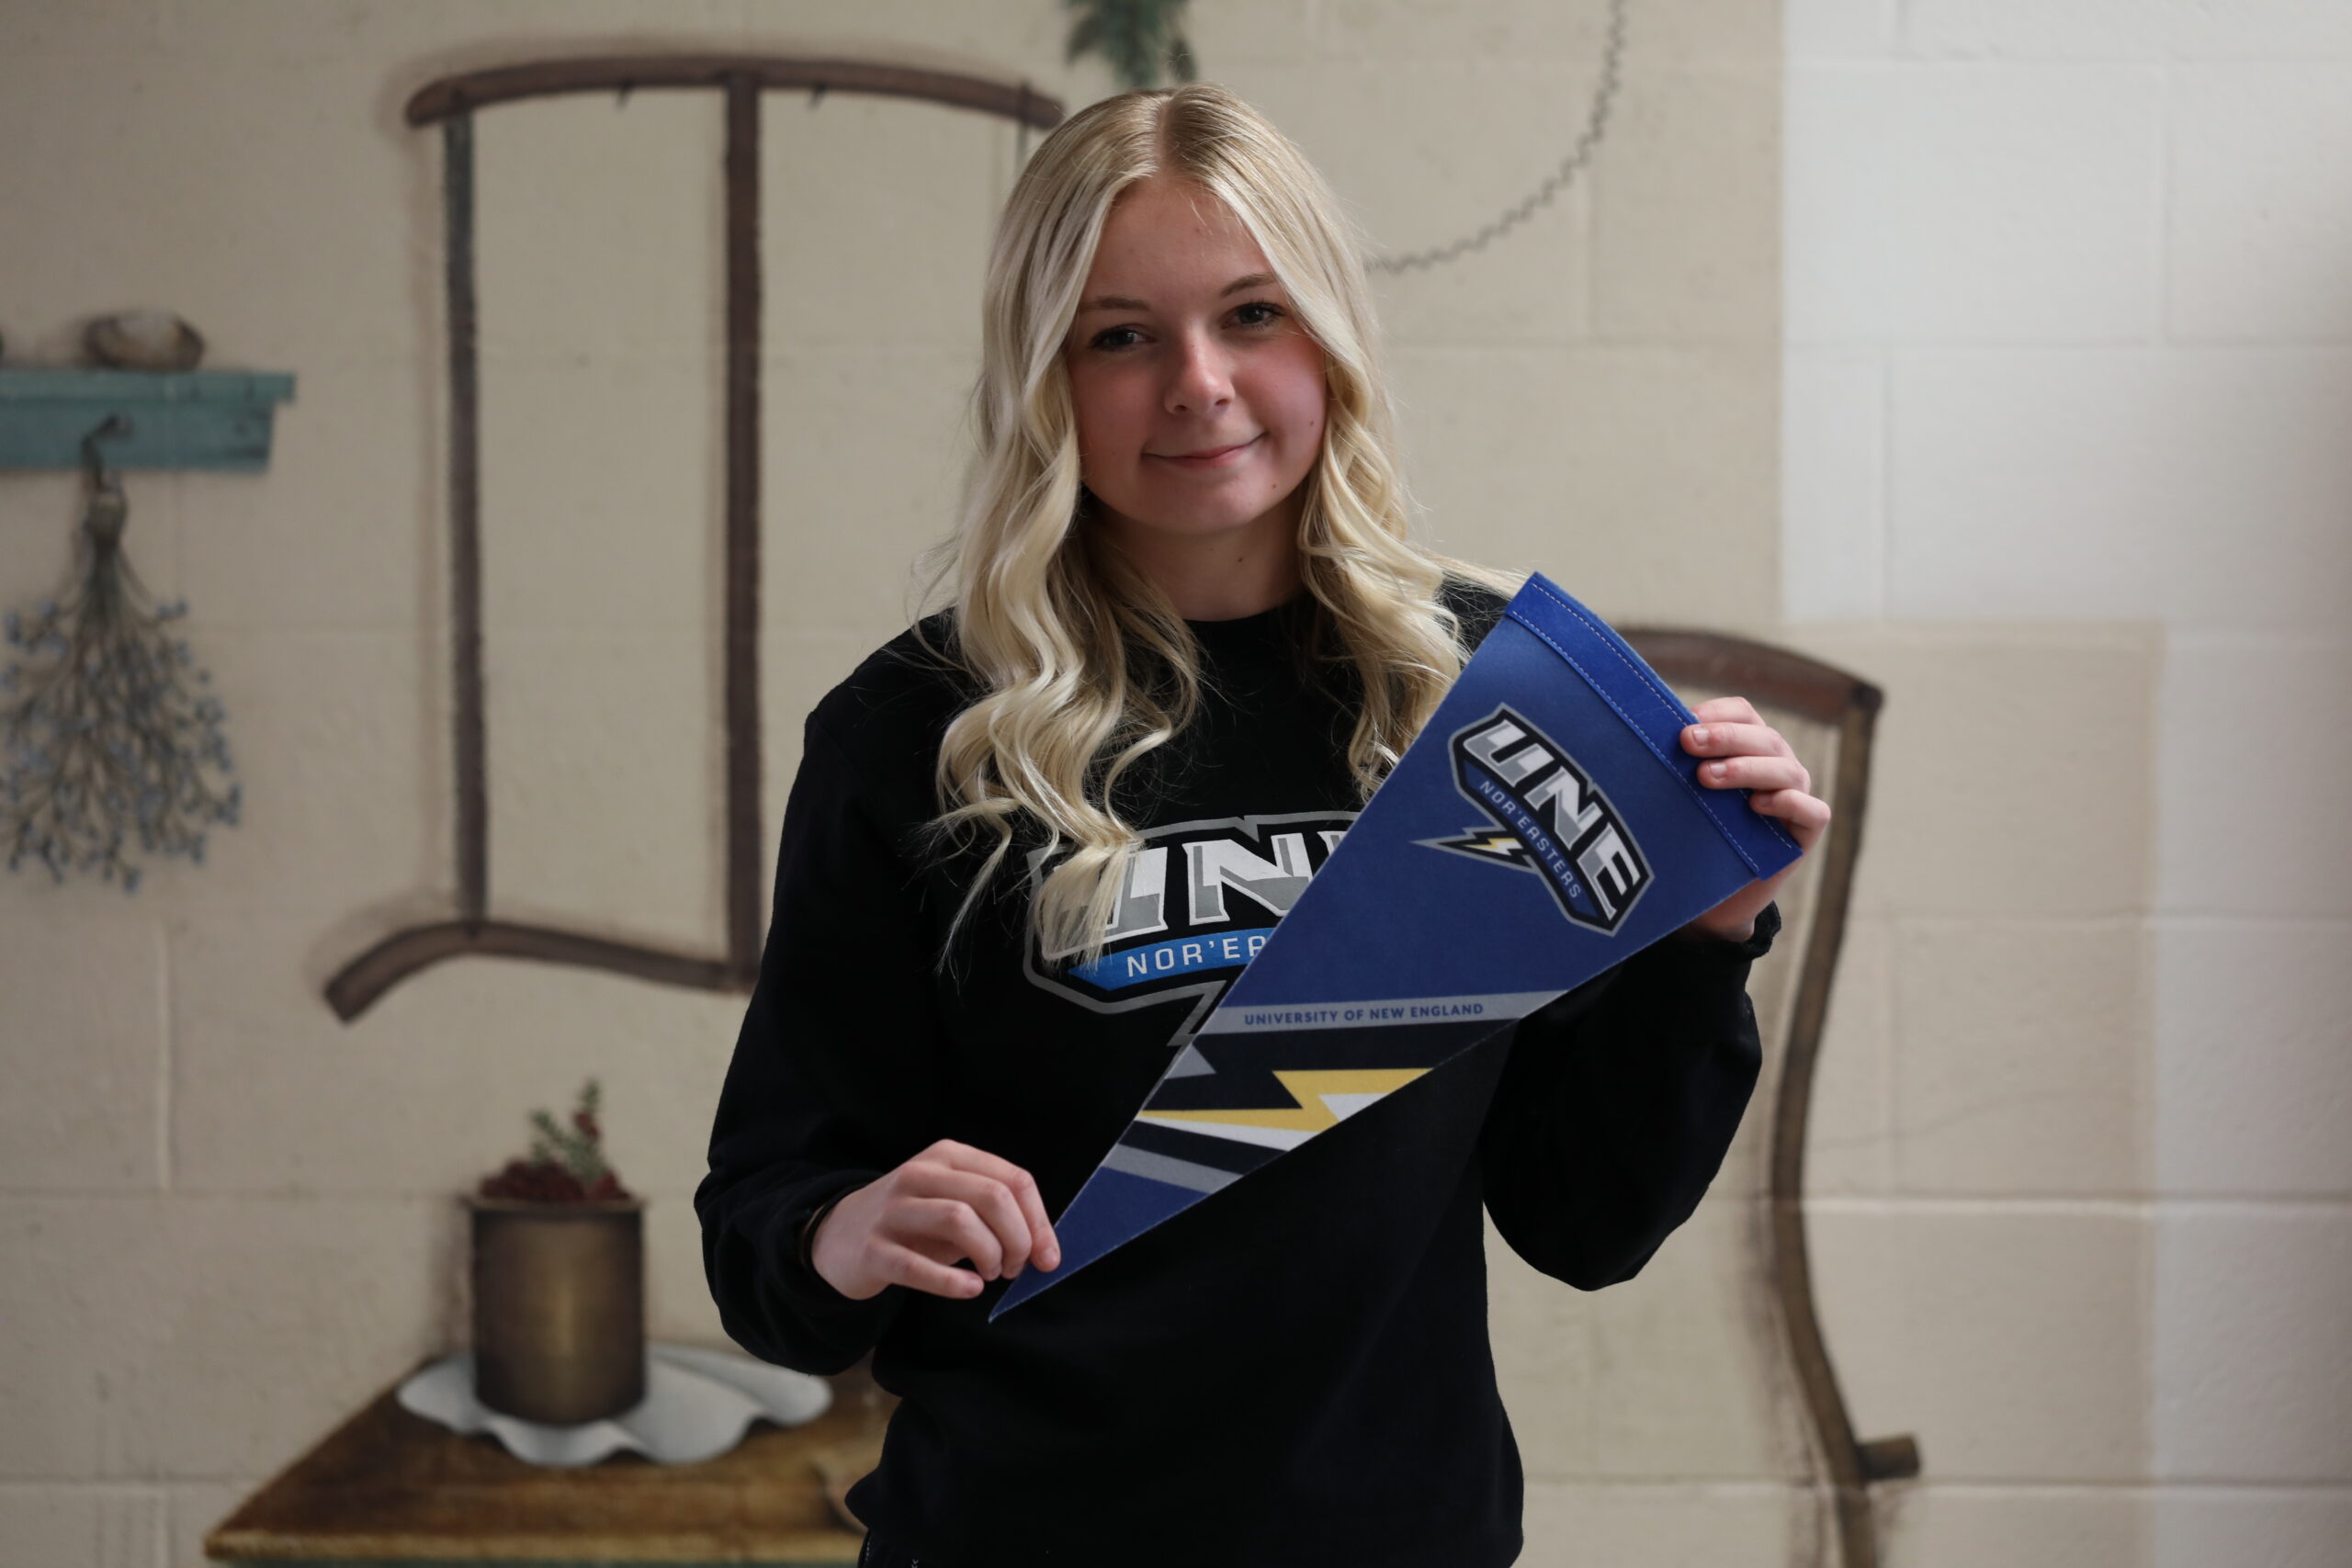 A photo of a young smiling white woman holding a college pennant that says UNE